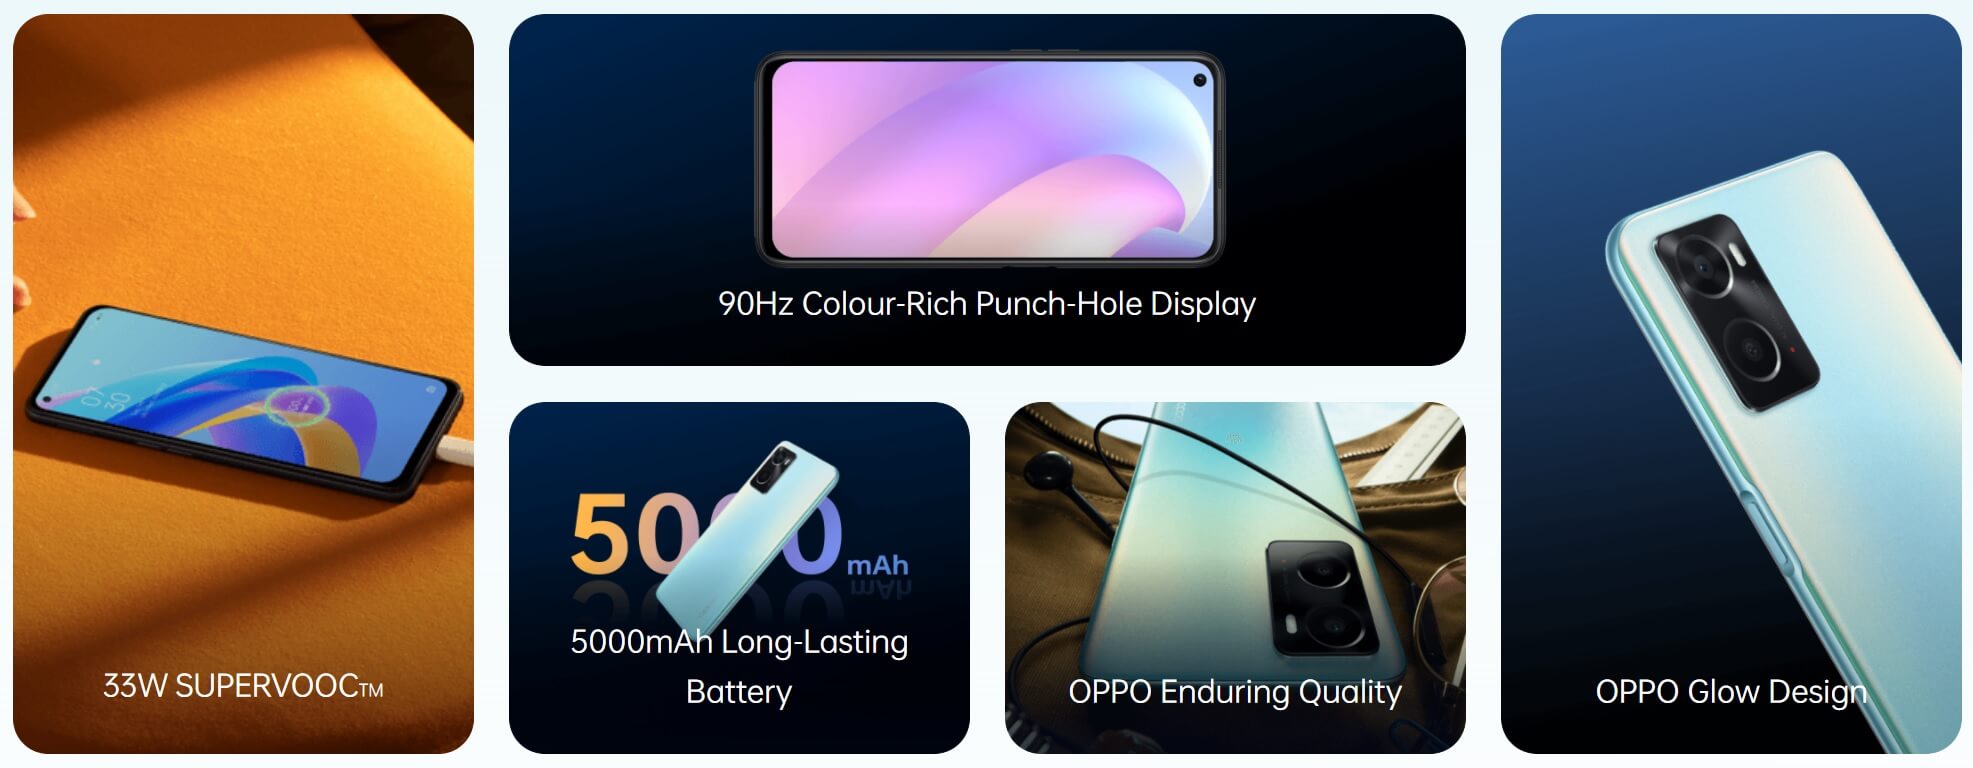 OPPO A76 features